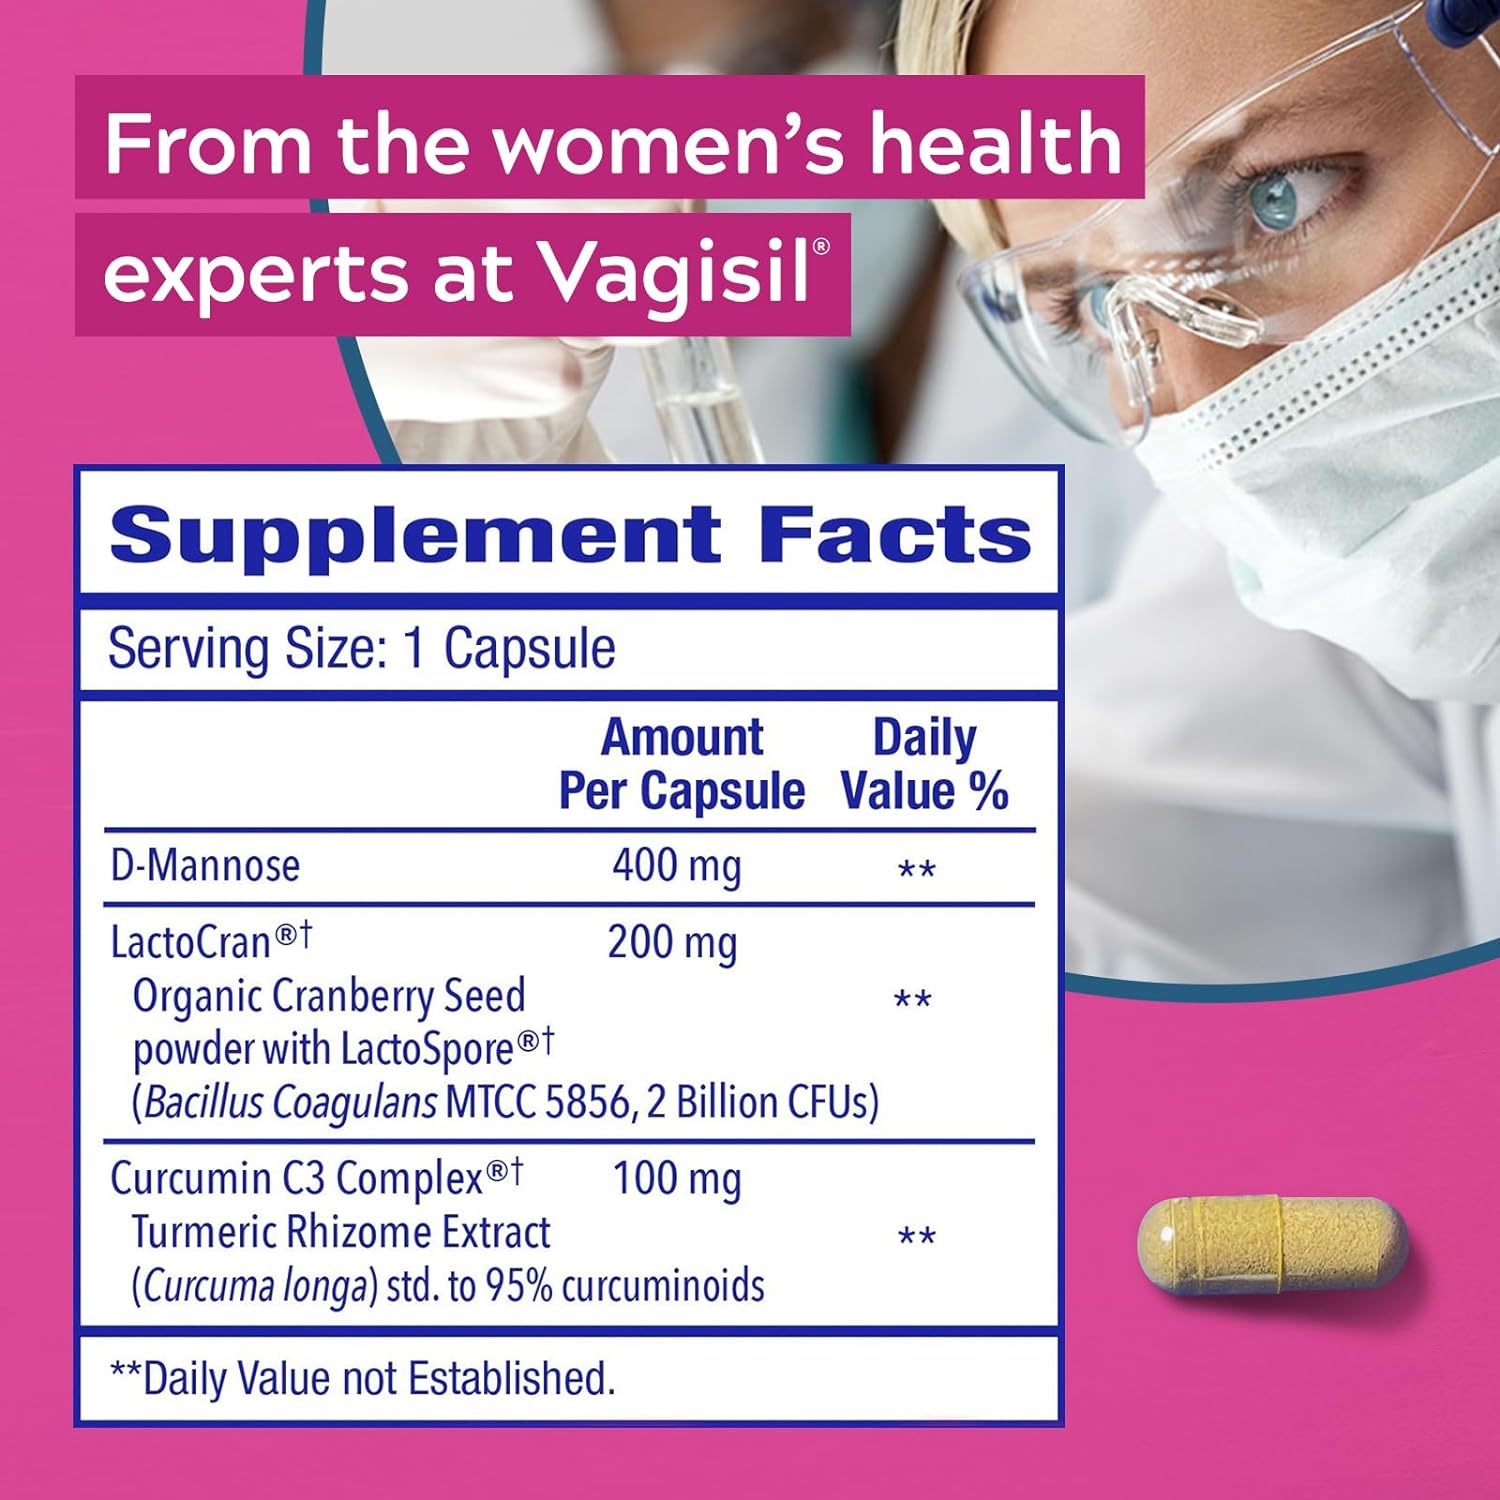 Vagisil Urinary Tract Health Supplements, Clinically-Proven Probiotics, Protects Urinary Tract Health, Clean Ingredients, Helps Cleanse and Flush UTI-Causing Bacteria, 1 Capsule Daily, 30 Capsules : Health & Household